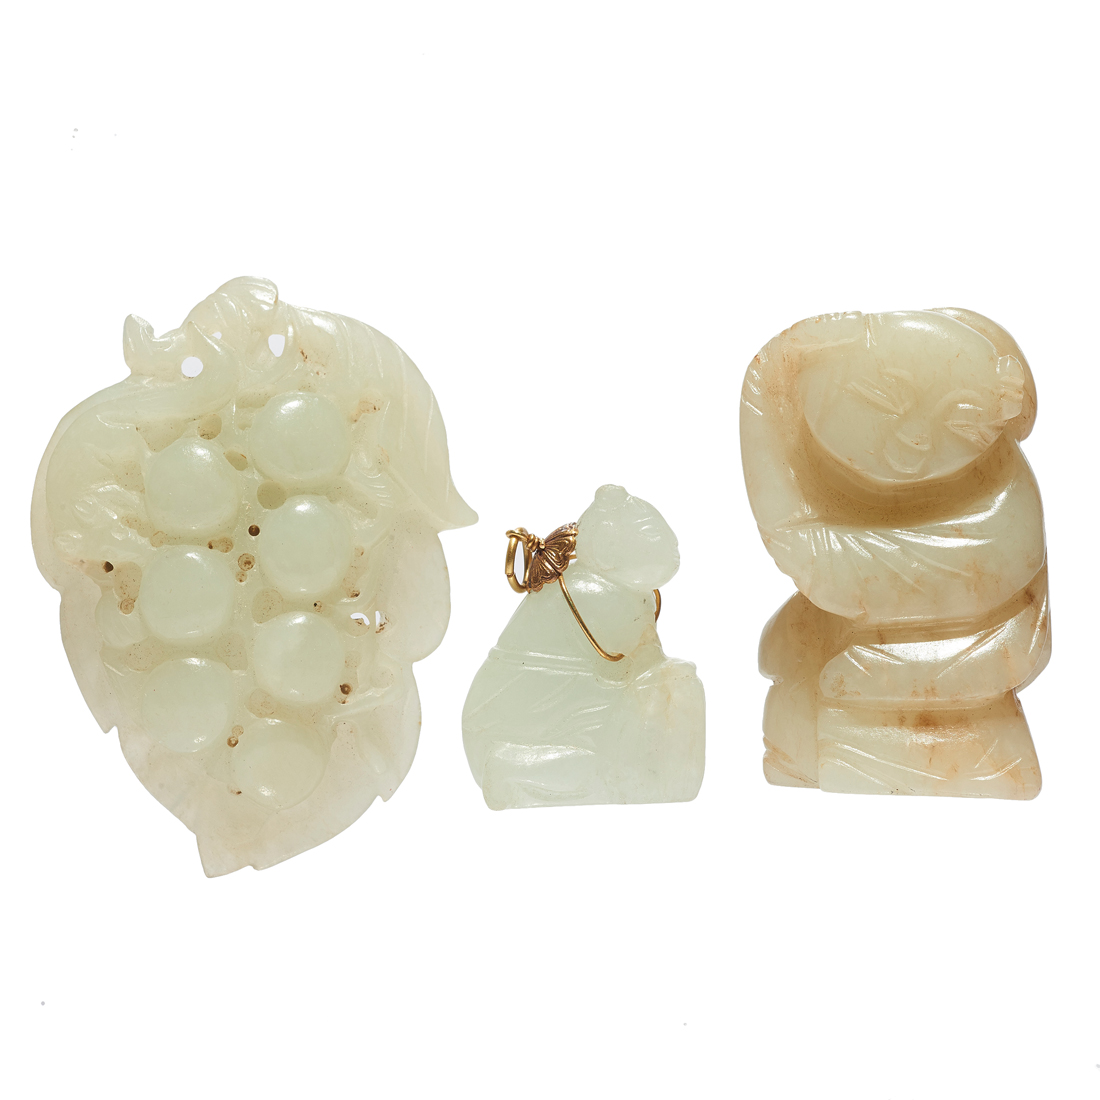  LOT OF 3 CHINESE CELADON JADE 2d3166